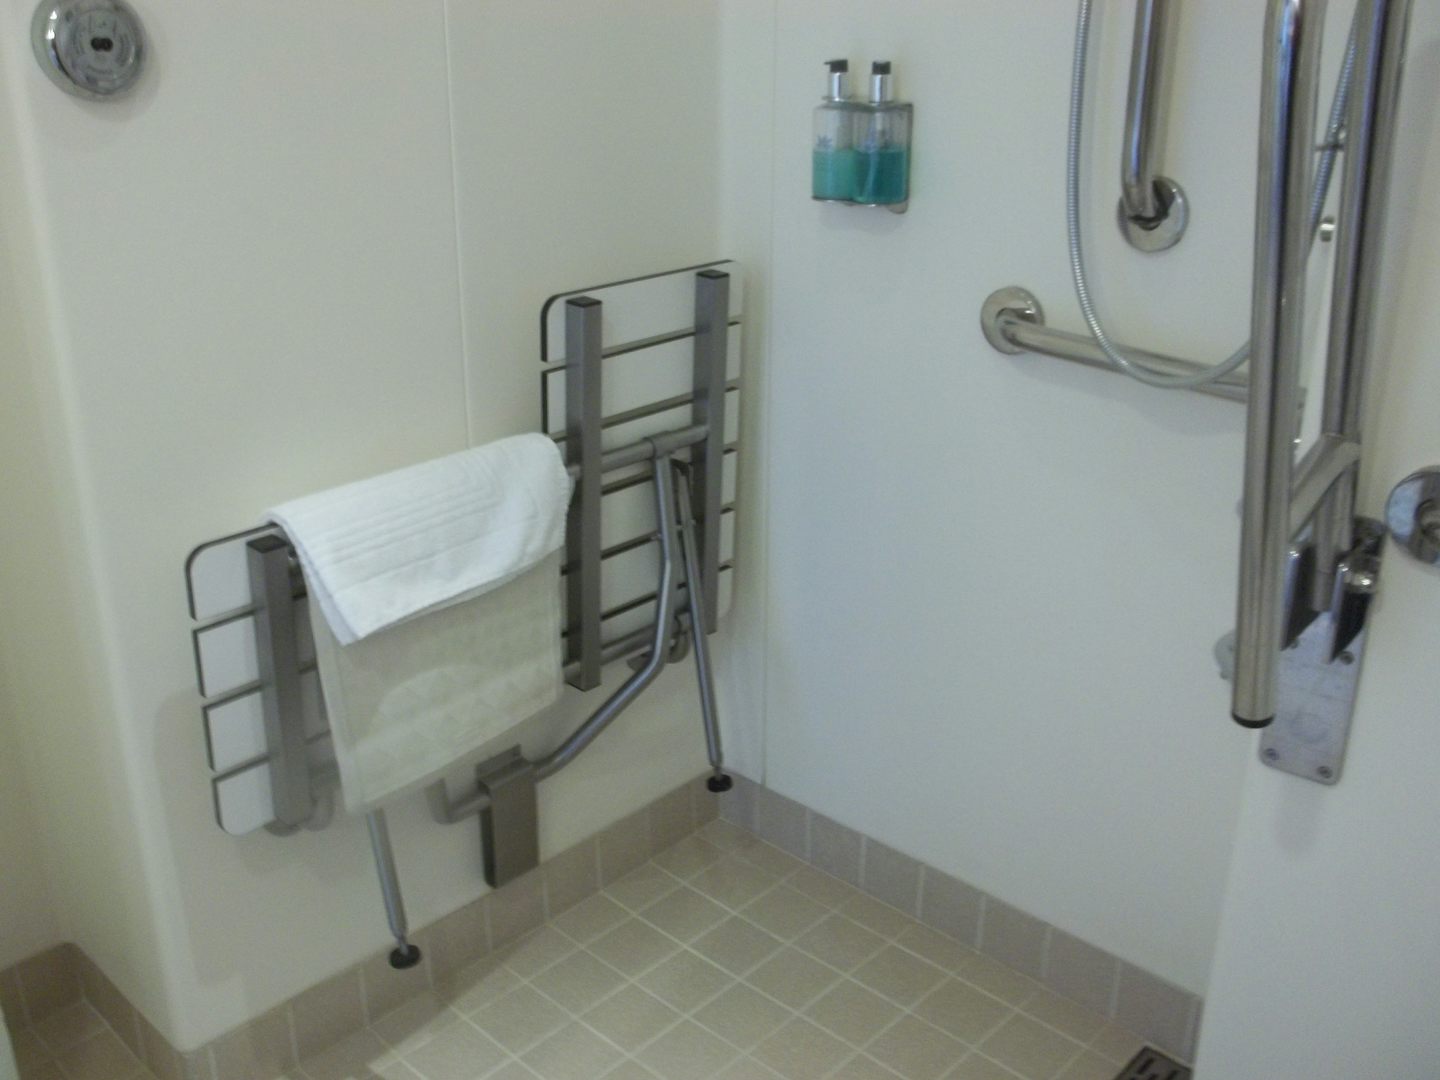 Shower area with floor drain perimenter, sturdy pull down bench.